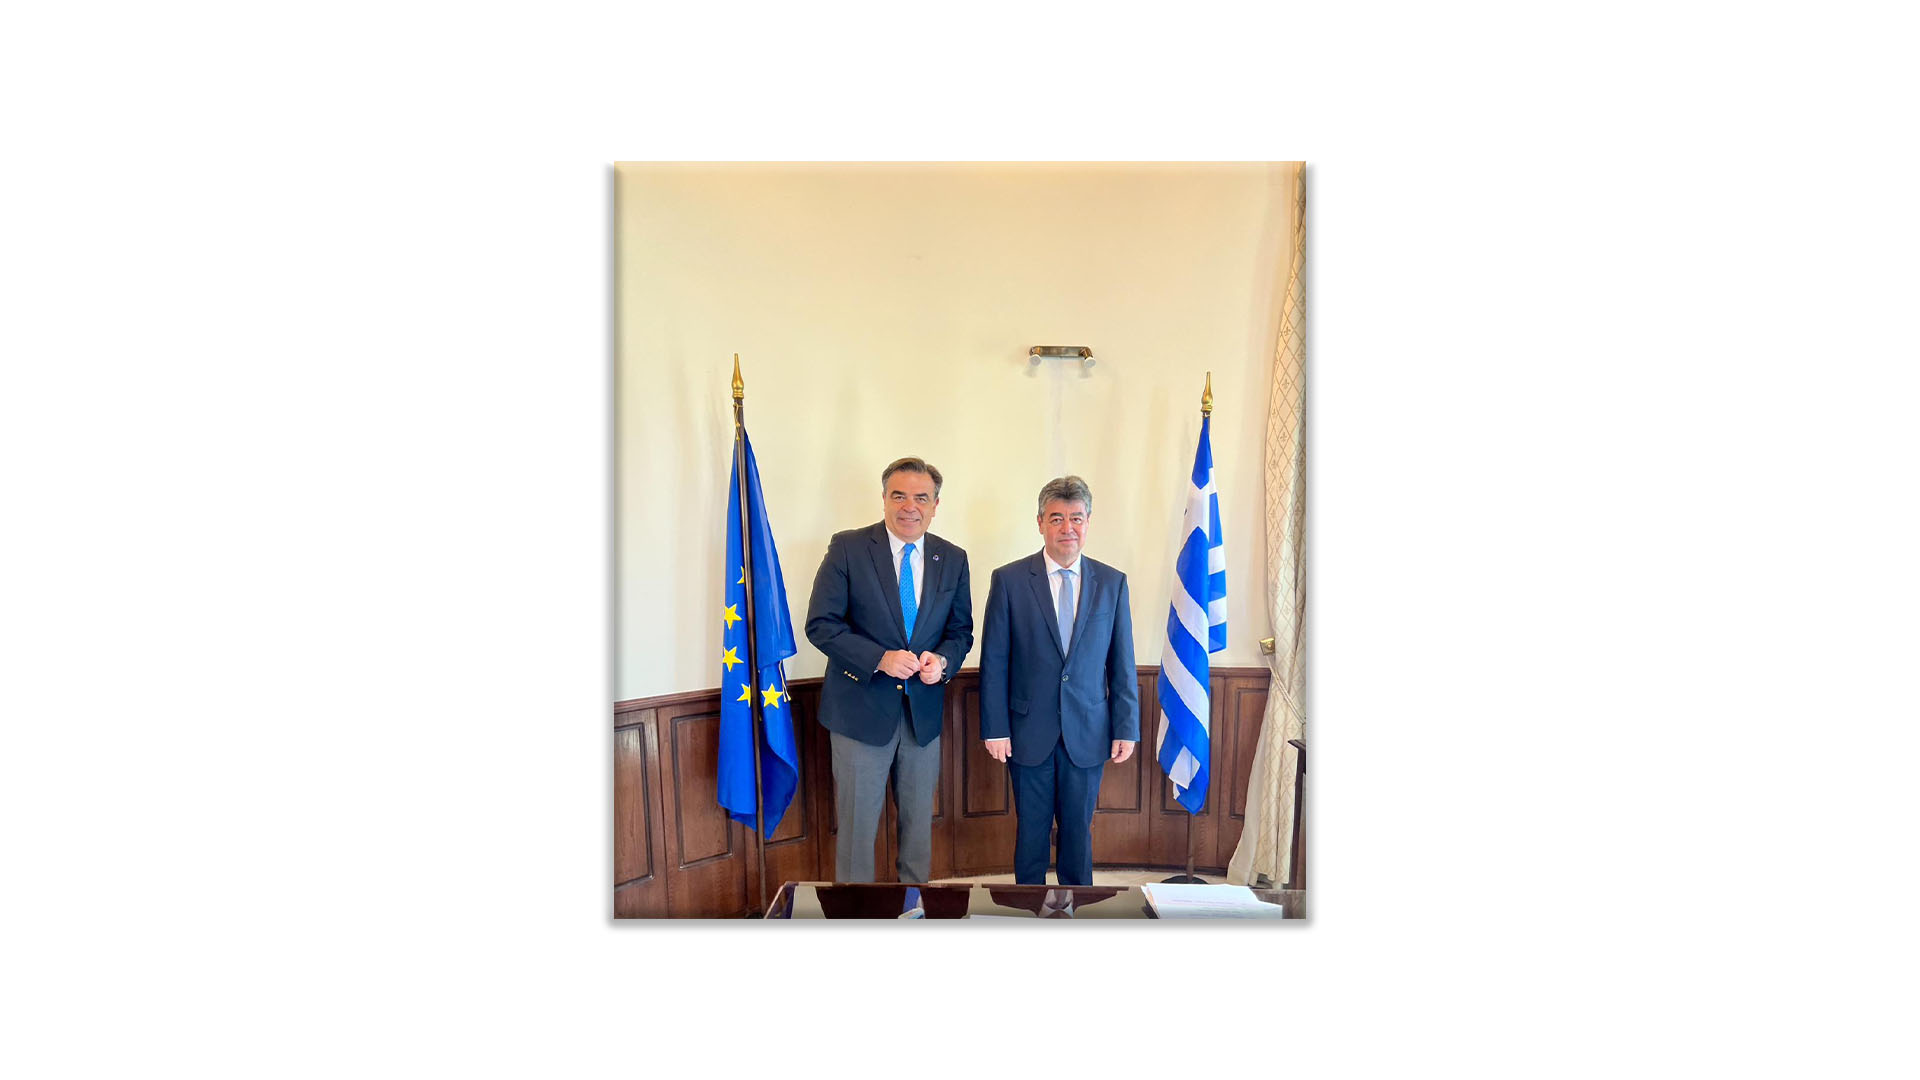 Charalambos Billinis, Rector: “Focusing on the European Dimension of the University of Thessaly”